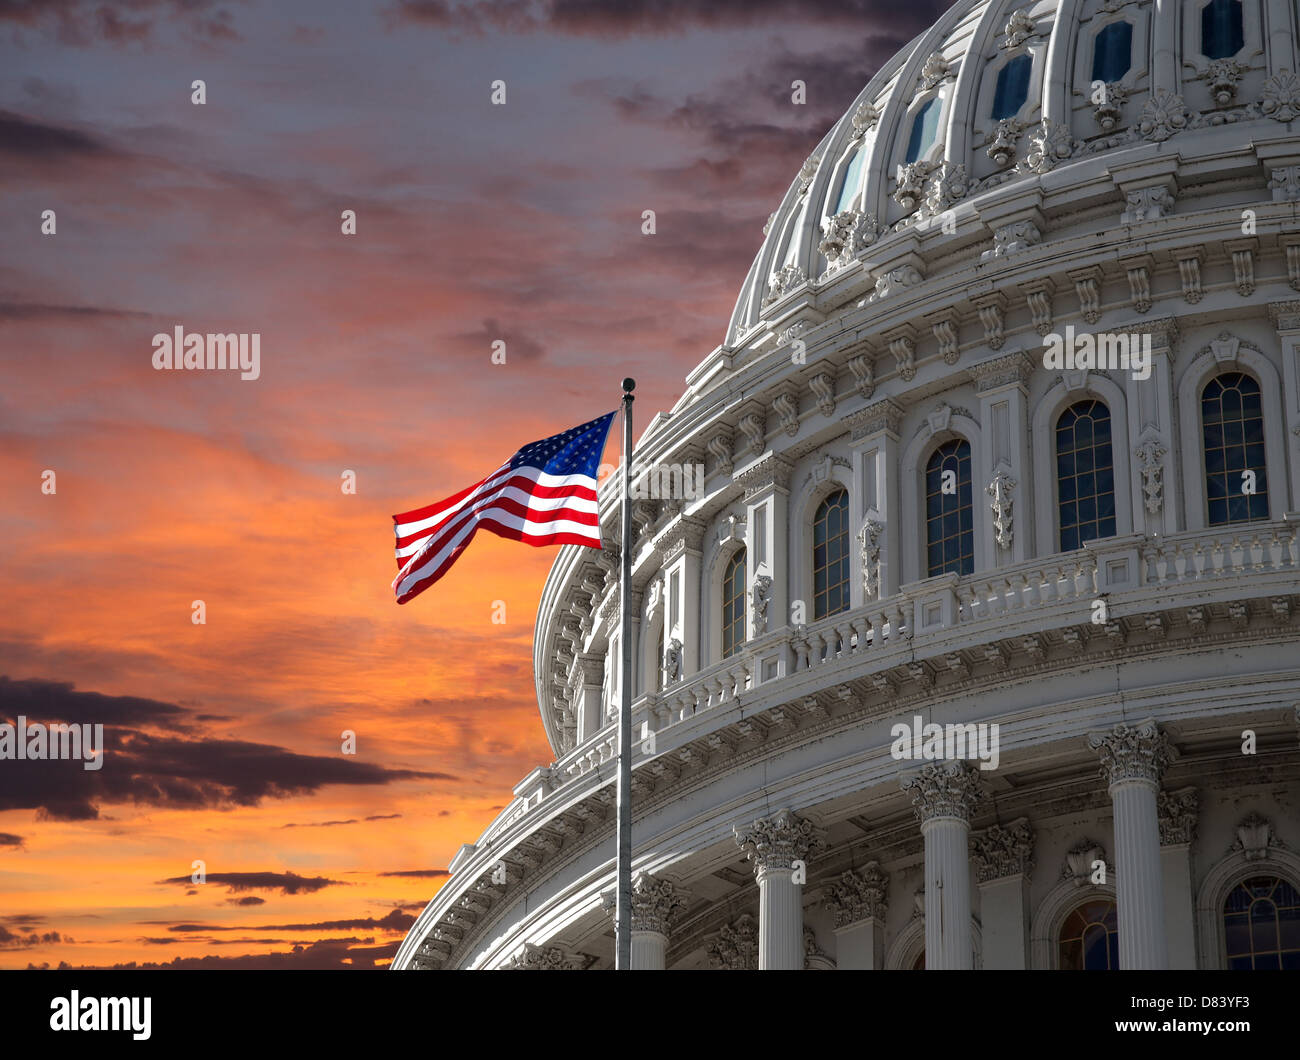 Sunset sky over the US Capitol building dome in Washington DC. Stock Photo